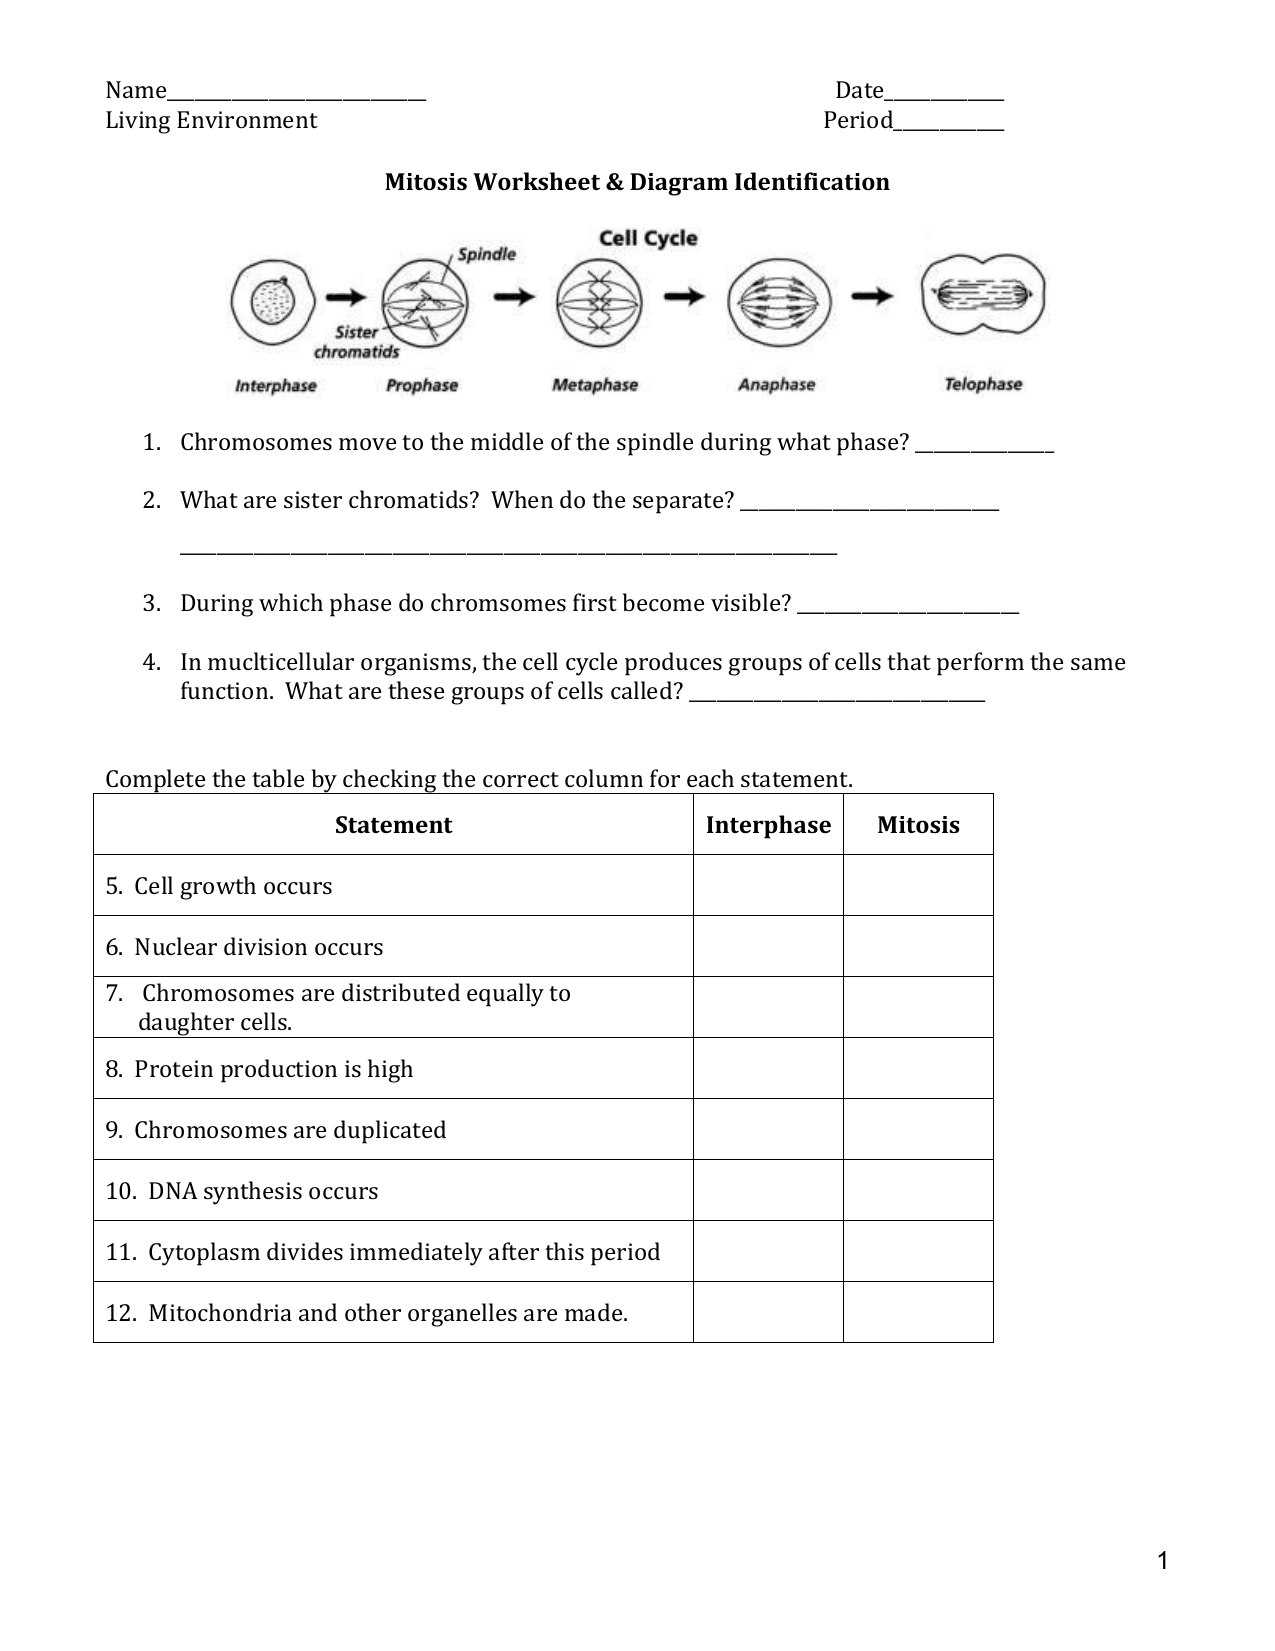 Mitosis Worksheet (11) Pertaining To Cell Division Worksheet Answers